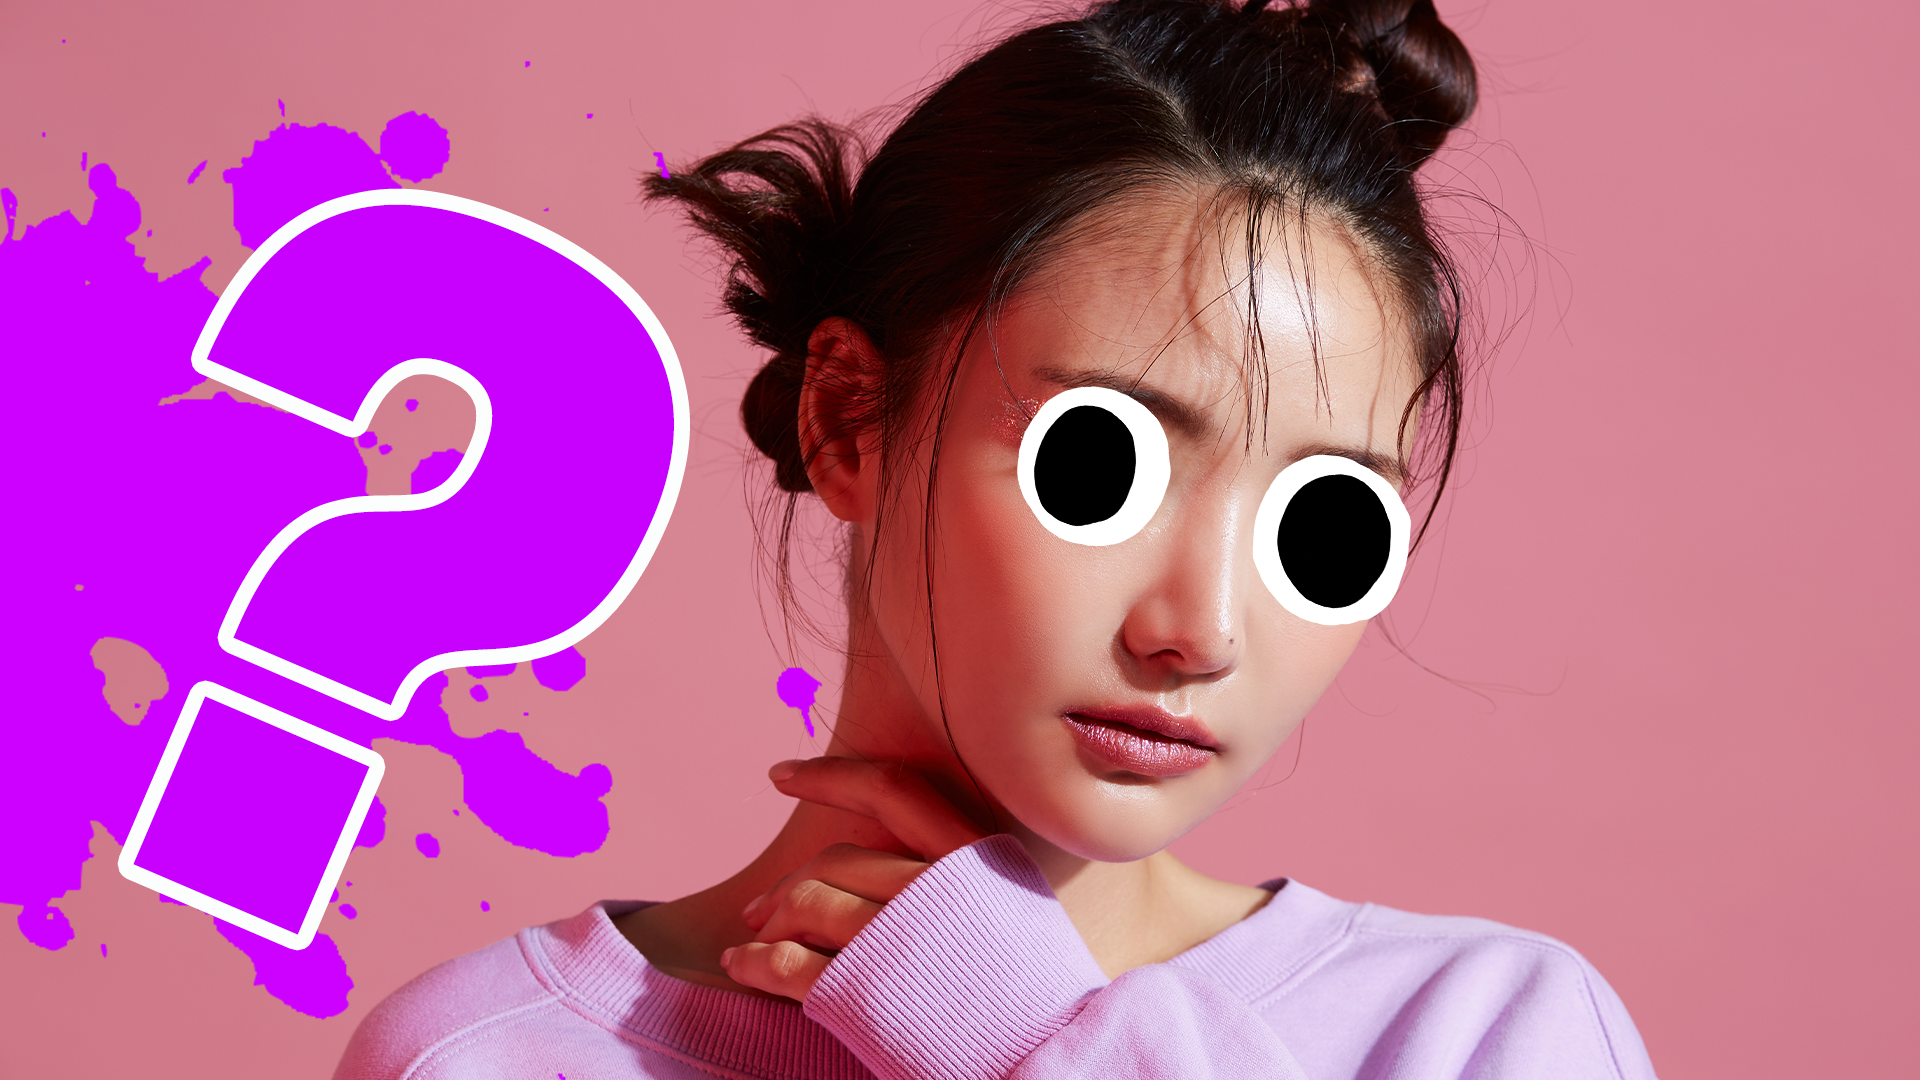 Girl on pink background with splat and question marks